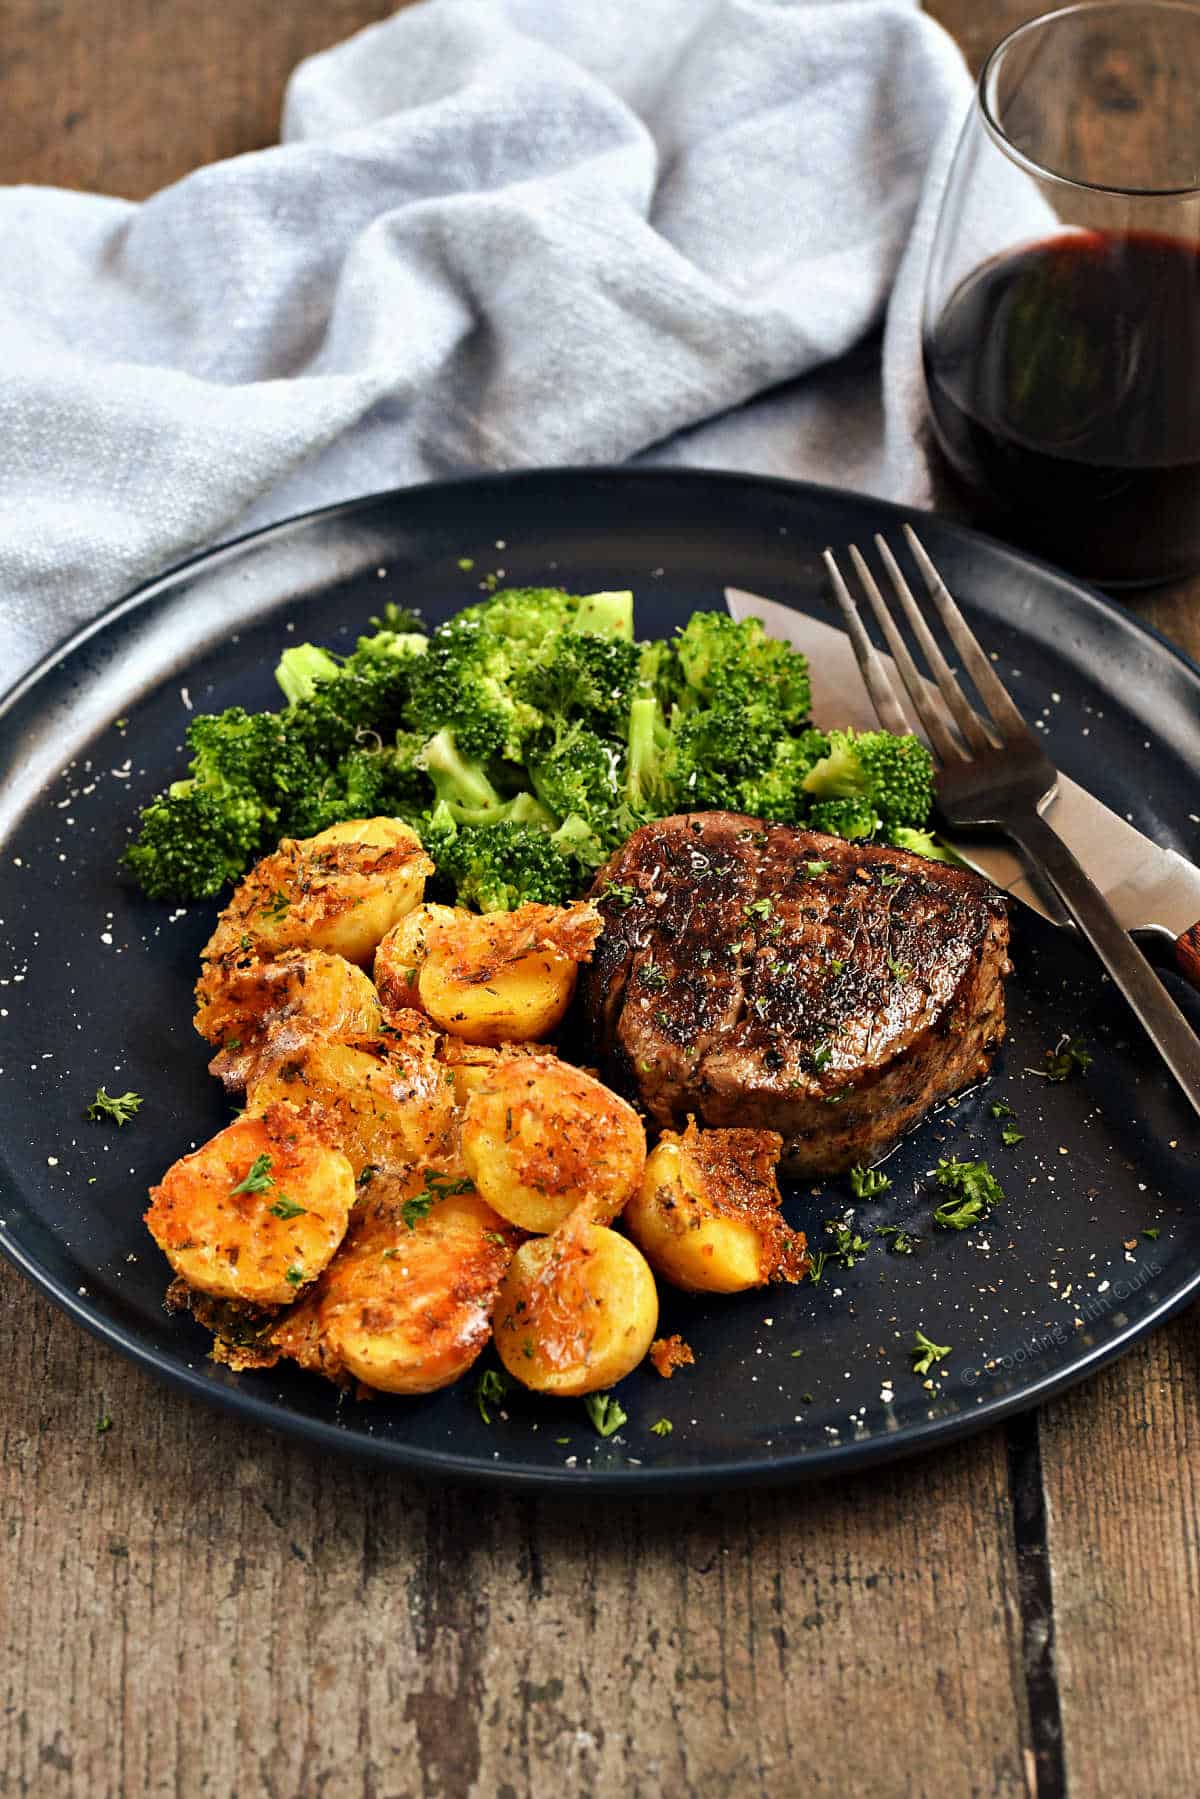 Crispy parmesan roasted potatoes on a plate with a steak and steamed broccoli florets.